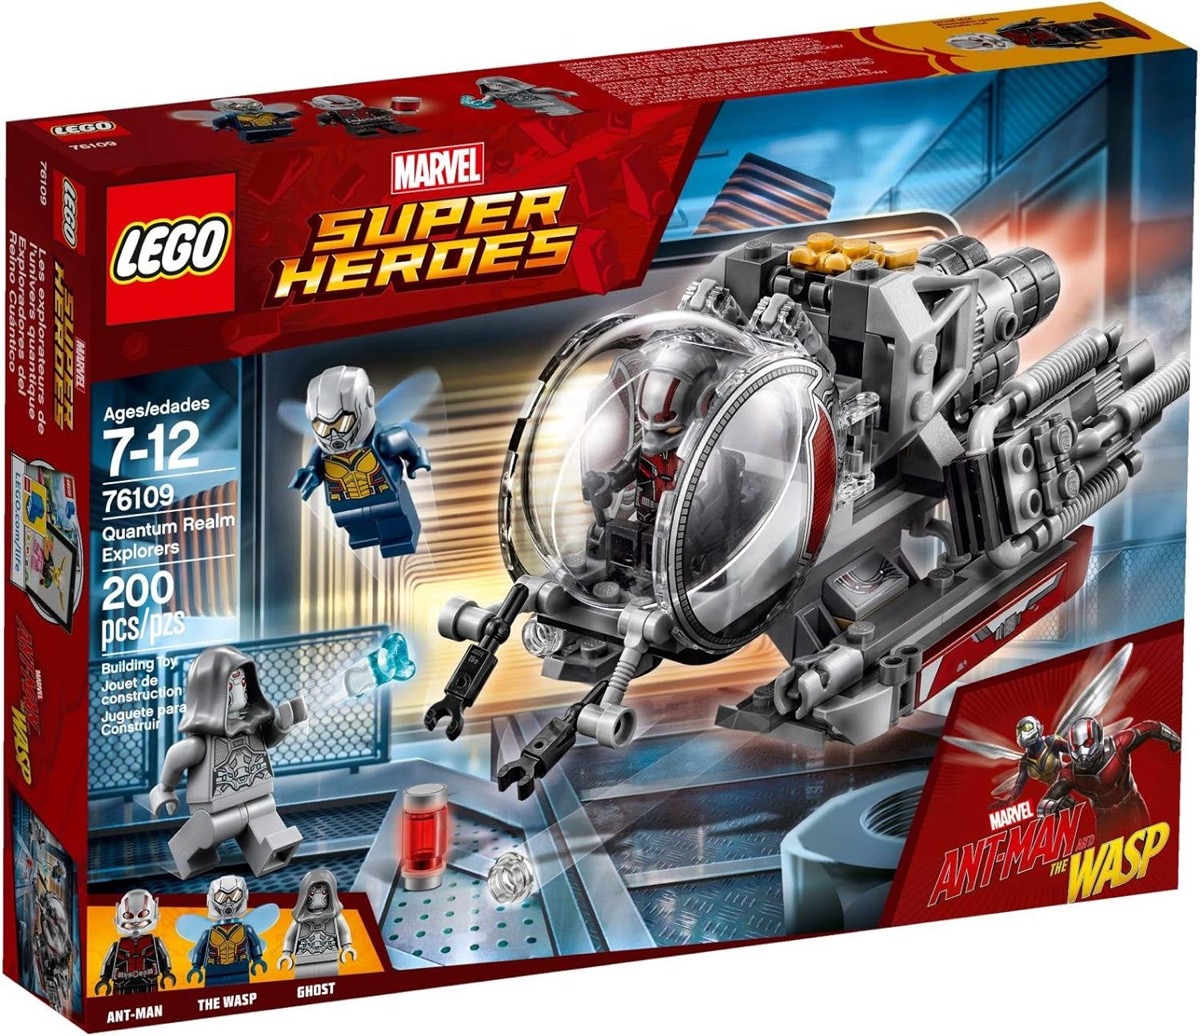 The LEGO Quantum Realm Explorers set from "Ant Man" 